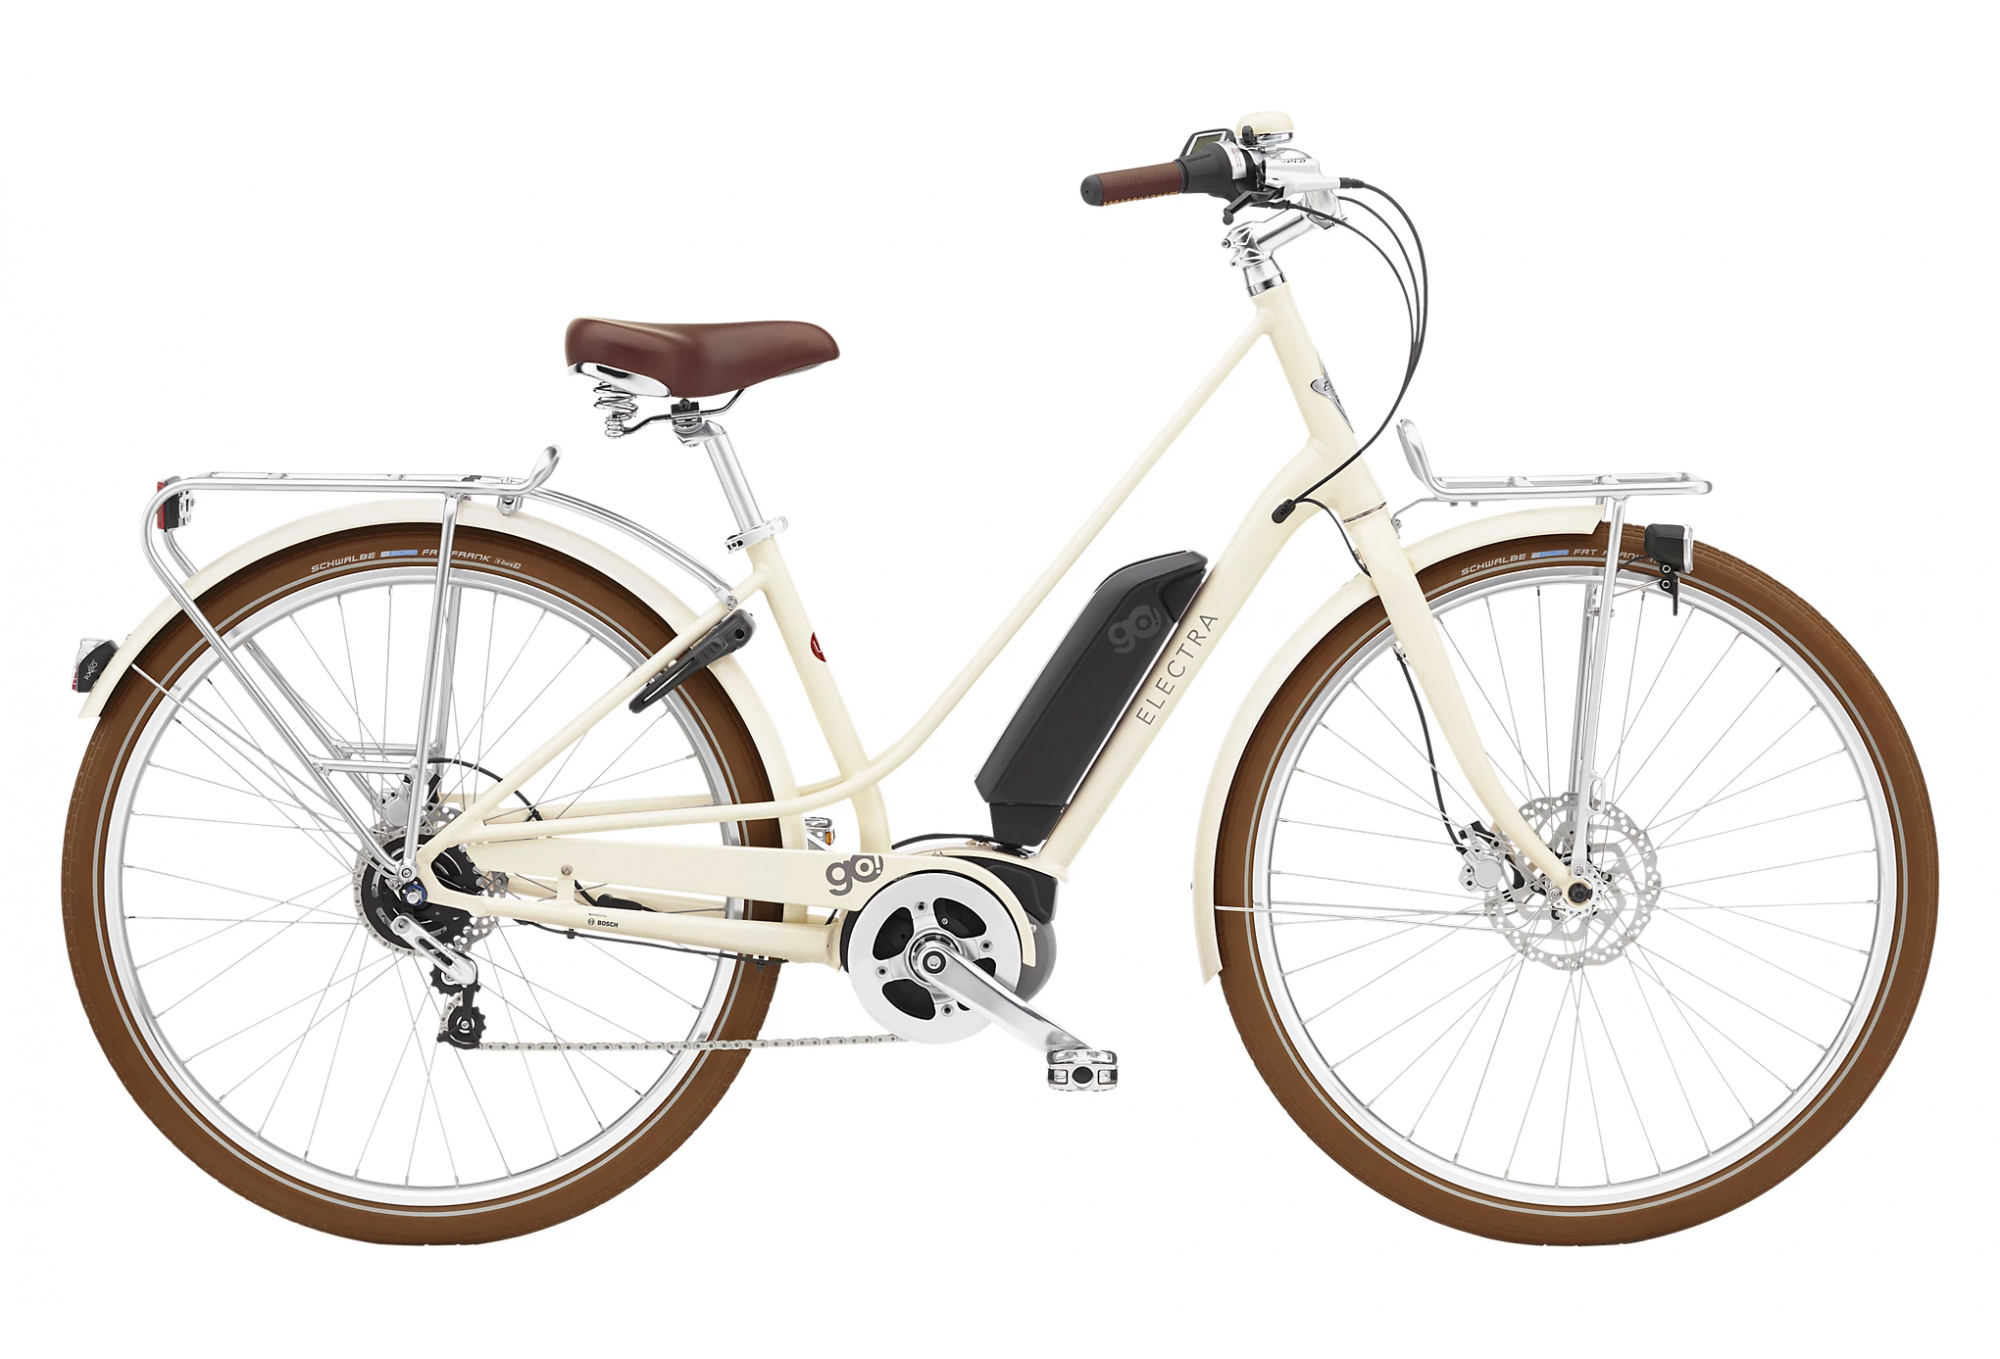 DAMCO BEQUILLE ROBUSTE POUR VELO ELECTRIQUE - Echo sports